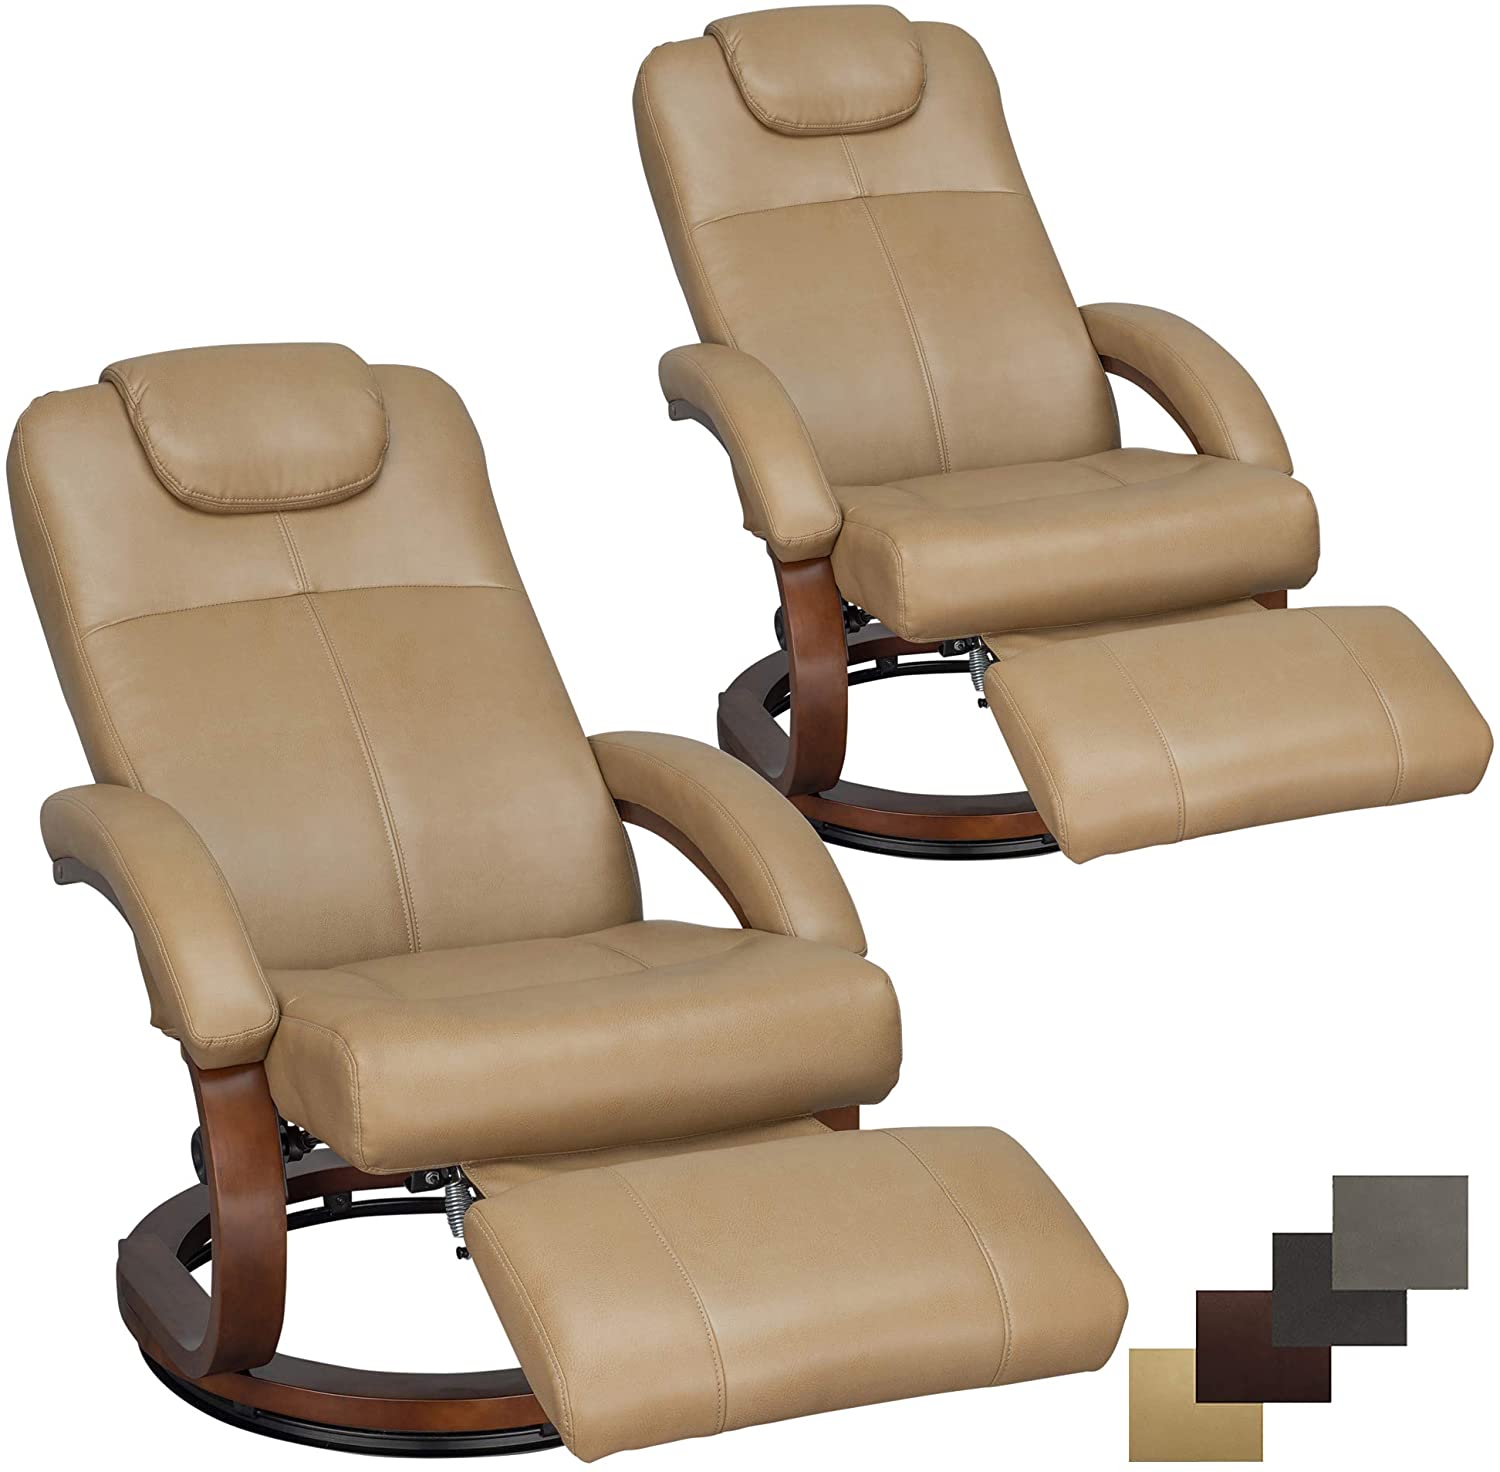 RecPro 28 inch Euro Recliner Chair